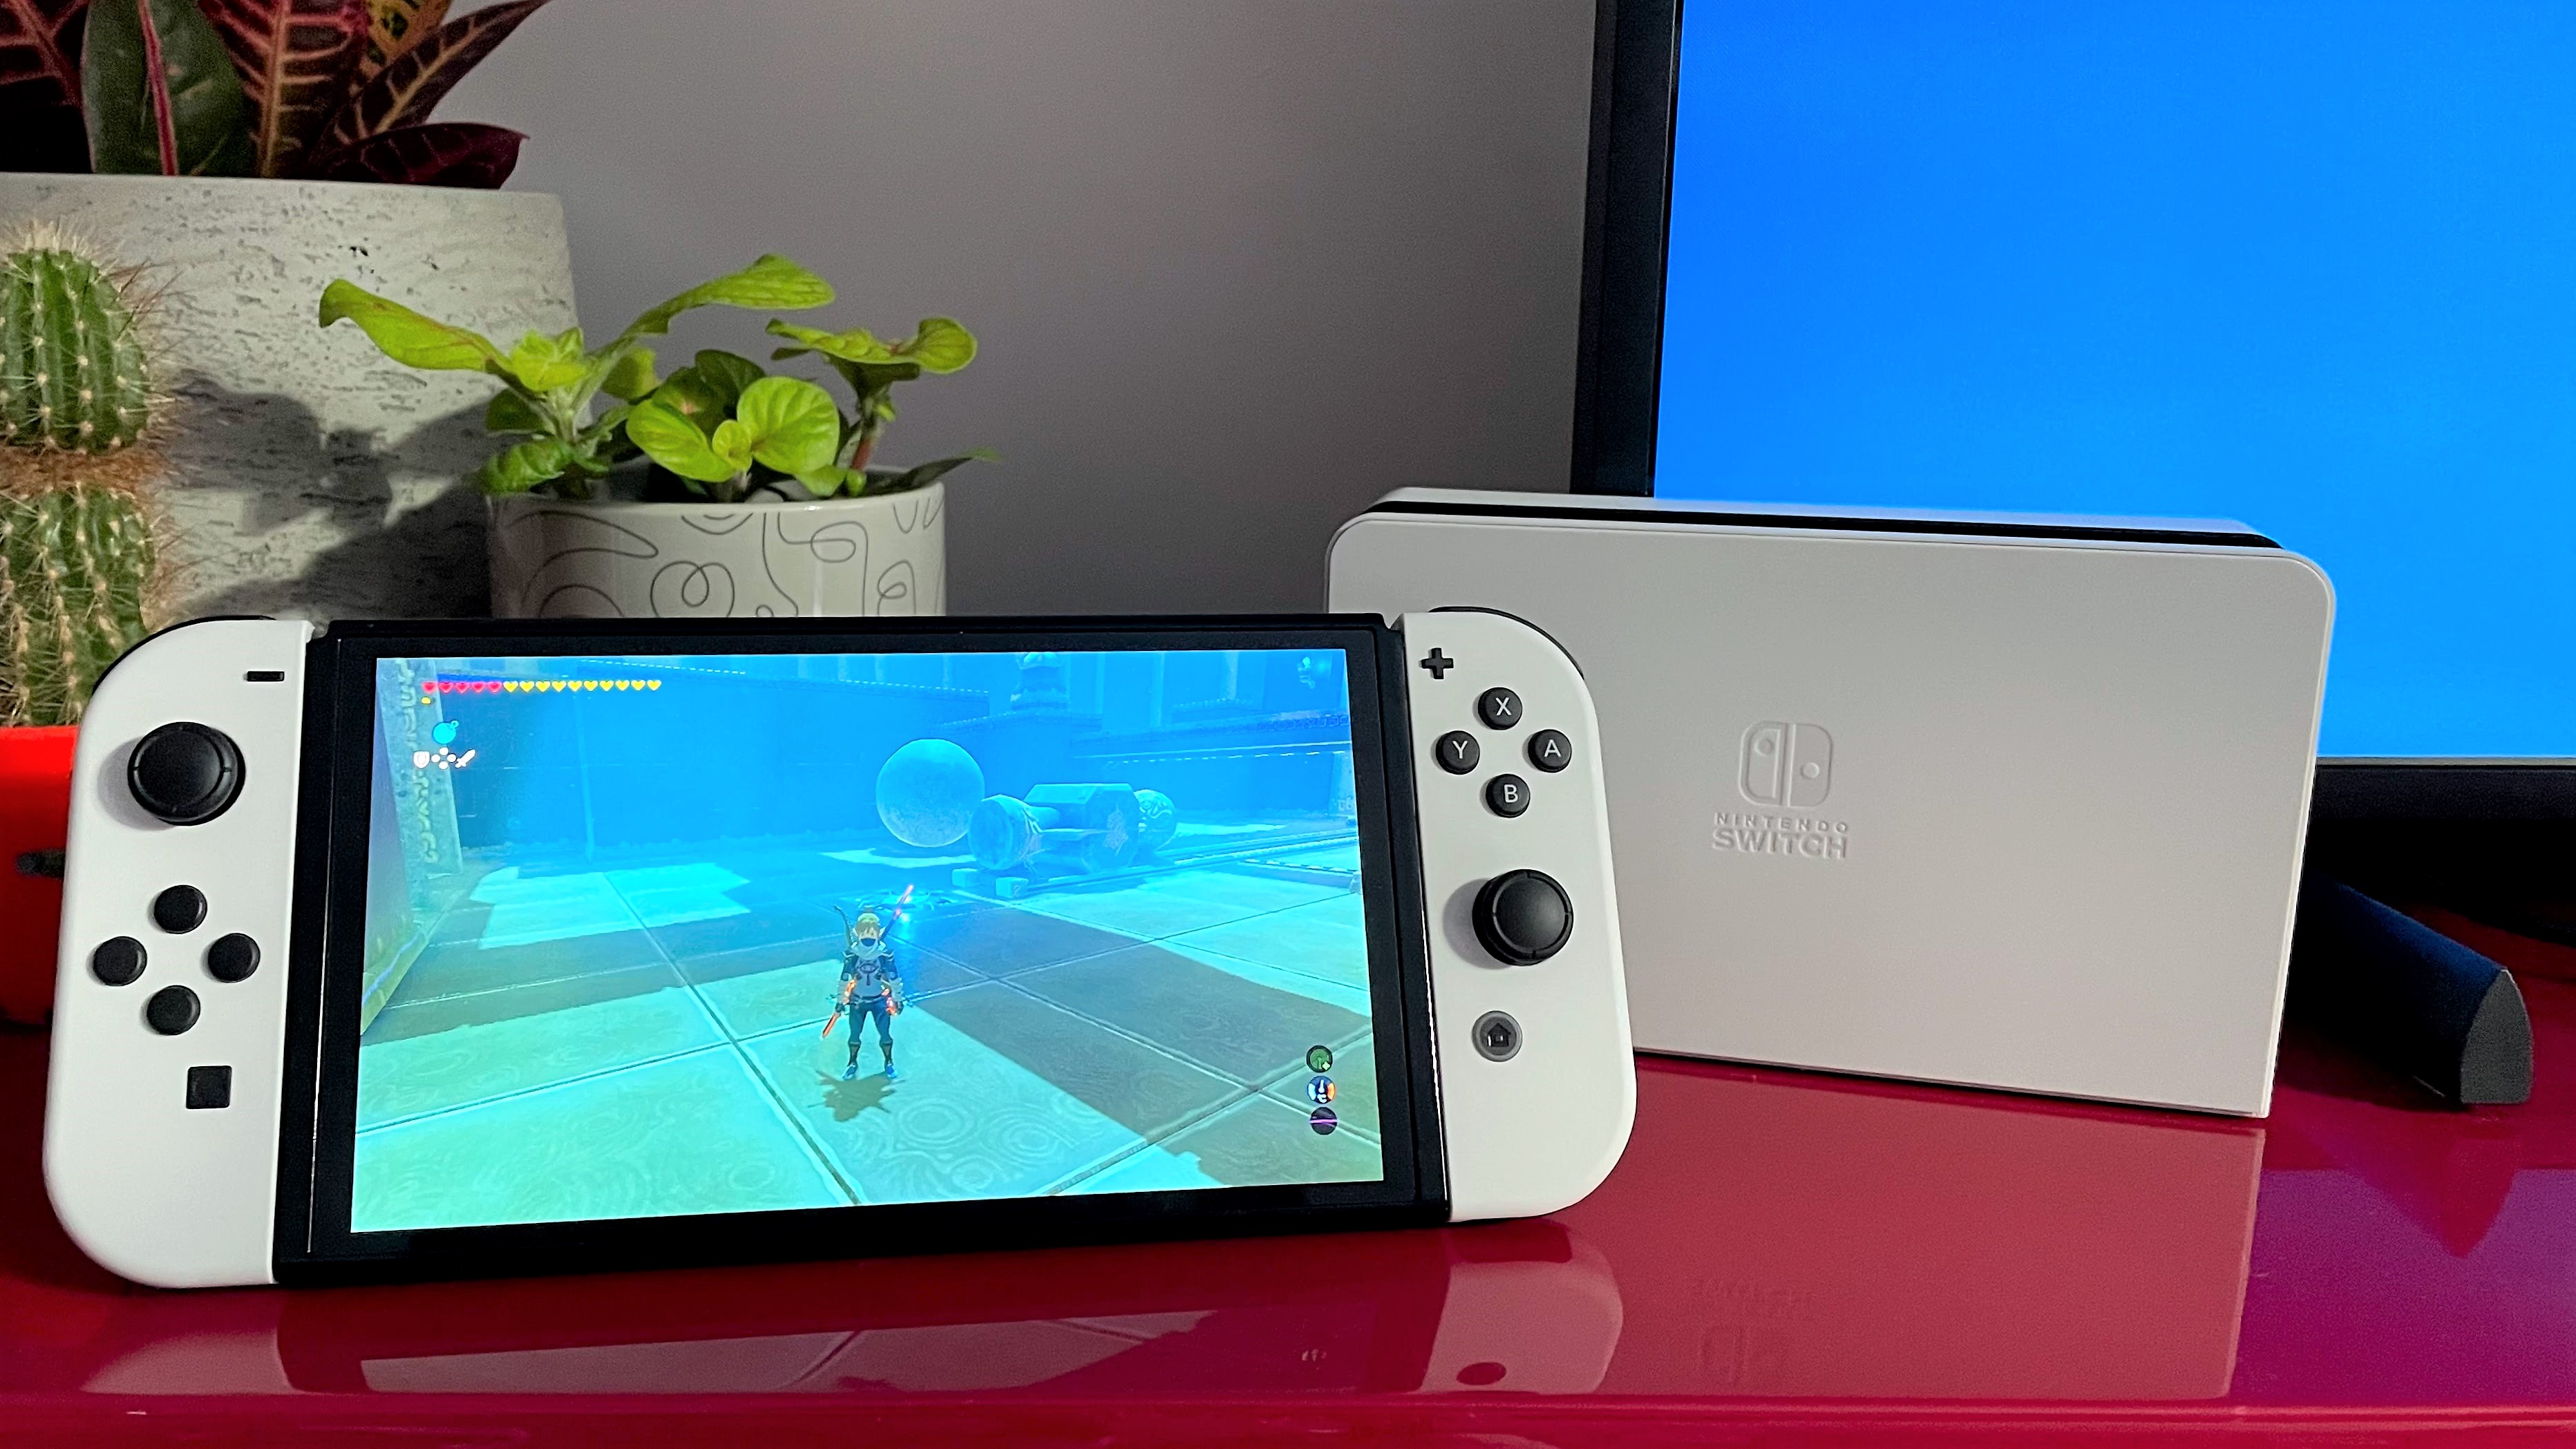 Nintendo Switch OLED Review: More Than Just a Pretty Screen